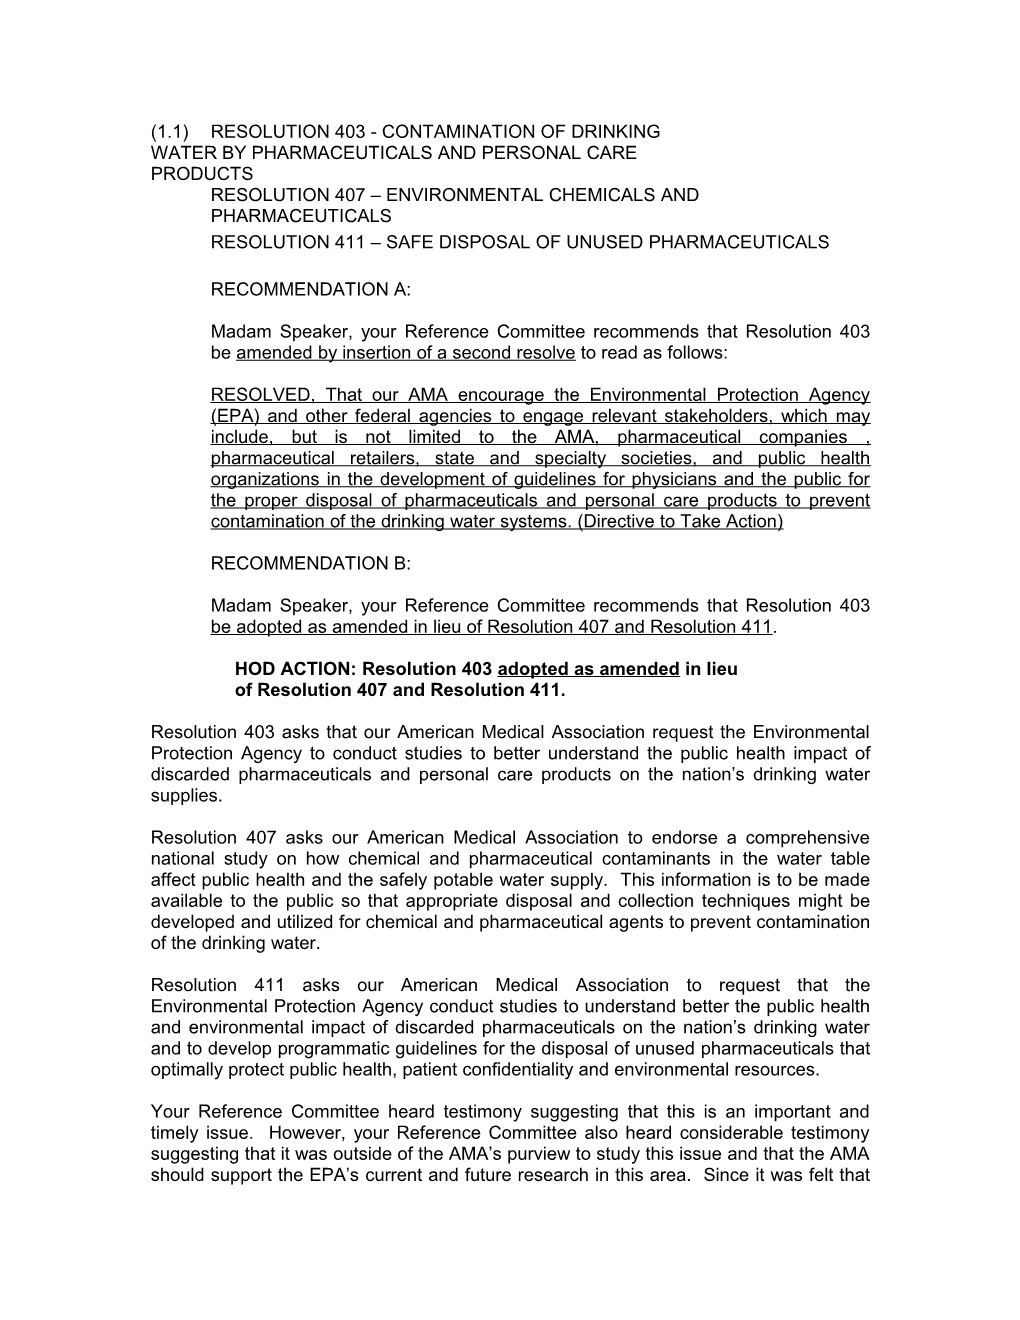 (1) Resolution 403 - Contamination of Drinking Water by Pharmaceuticals and Personal Care